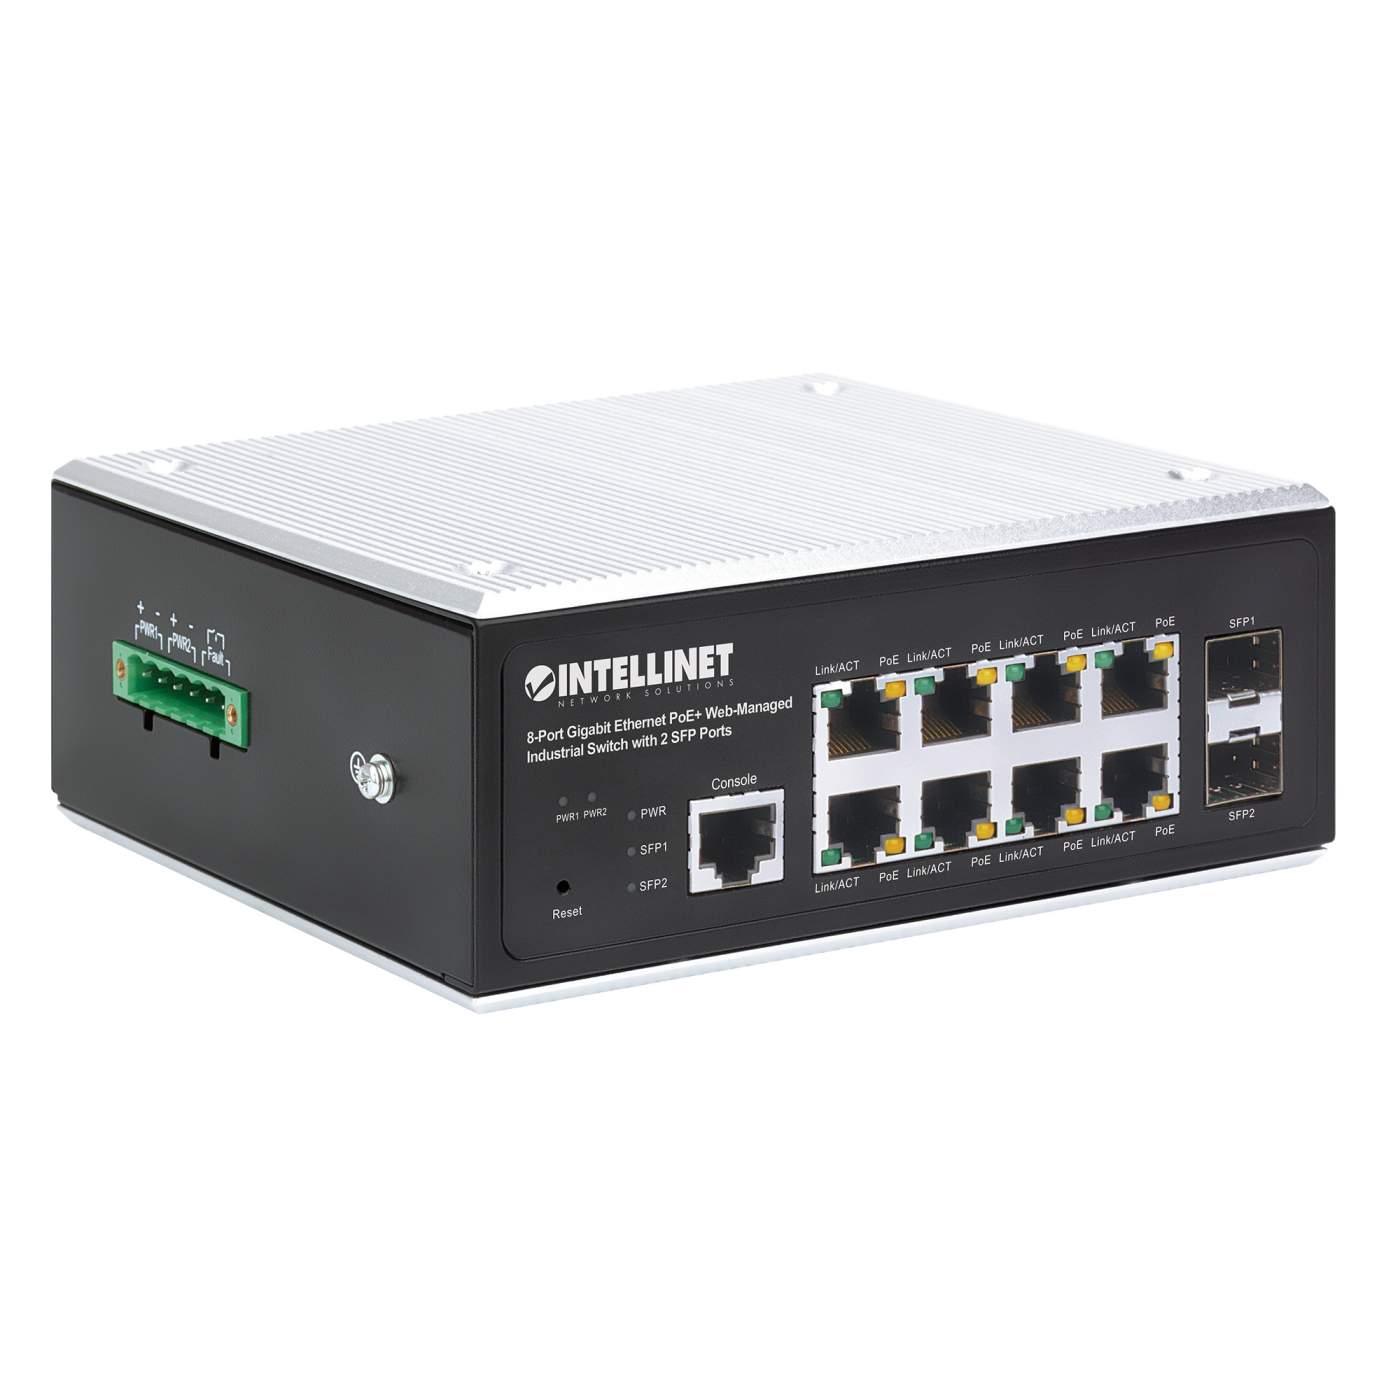 Industrial 8-Port Gigabit Ethernet PoE+ Layer 2+ Web-Managed Switch with 2 SFP Ports Image 3